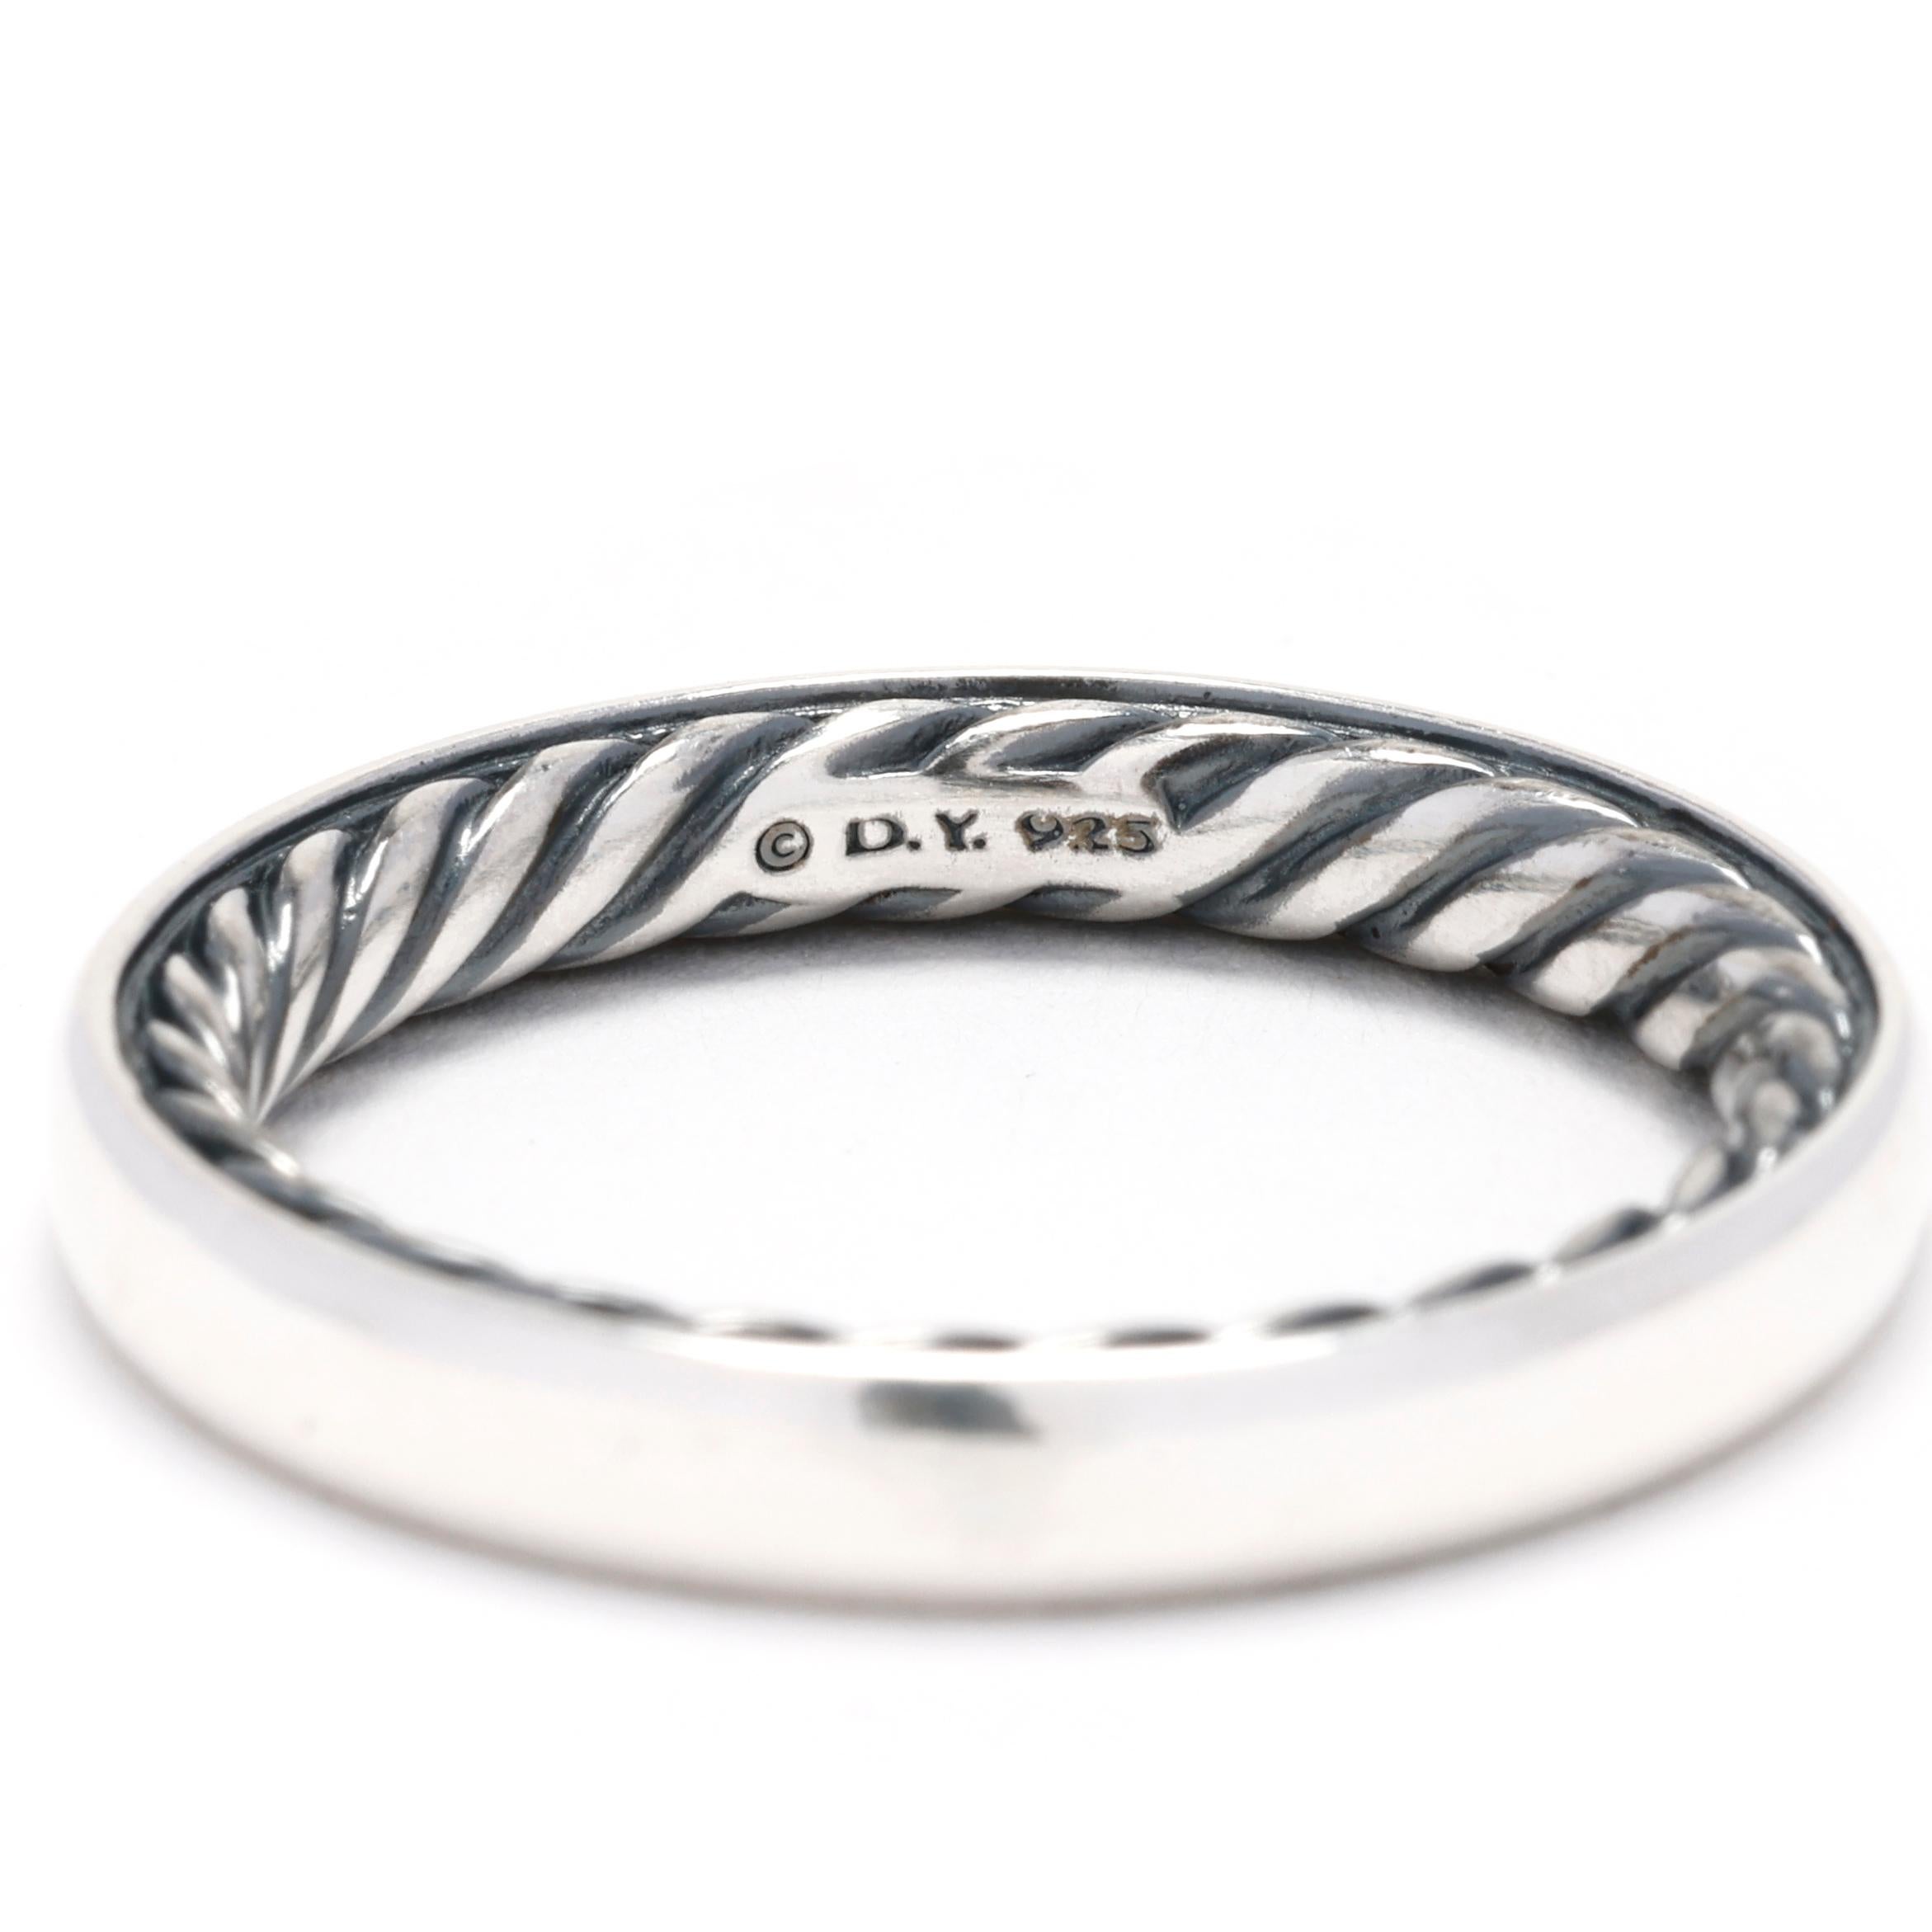 Women's or Men's David Yurman Sterling Silver Band Ring, Ring Size 5.75, Inner Twisted Design